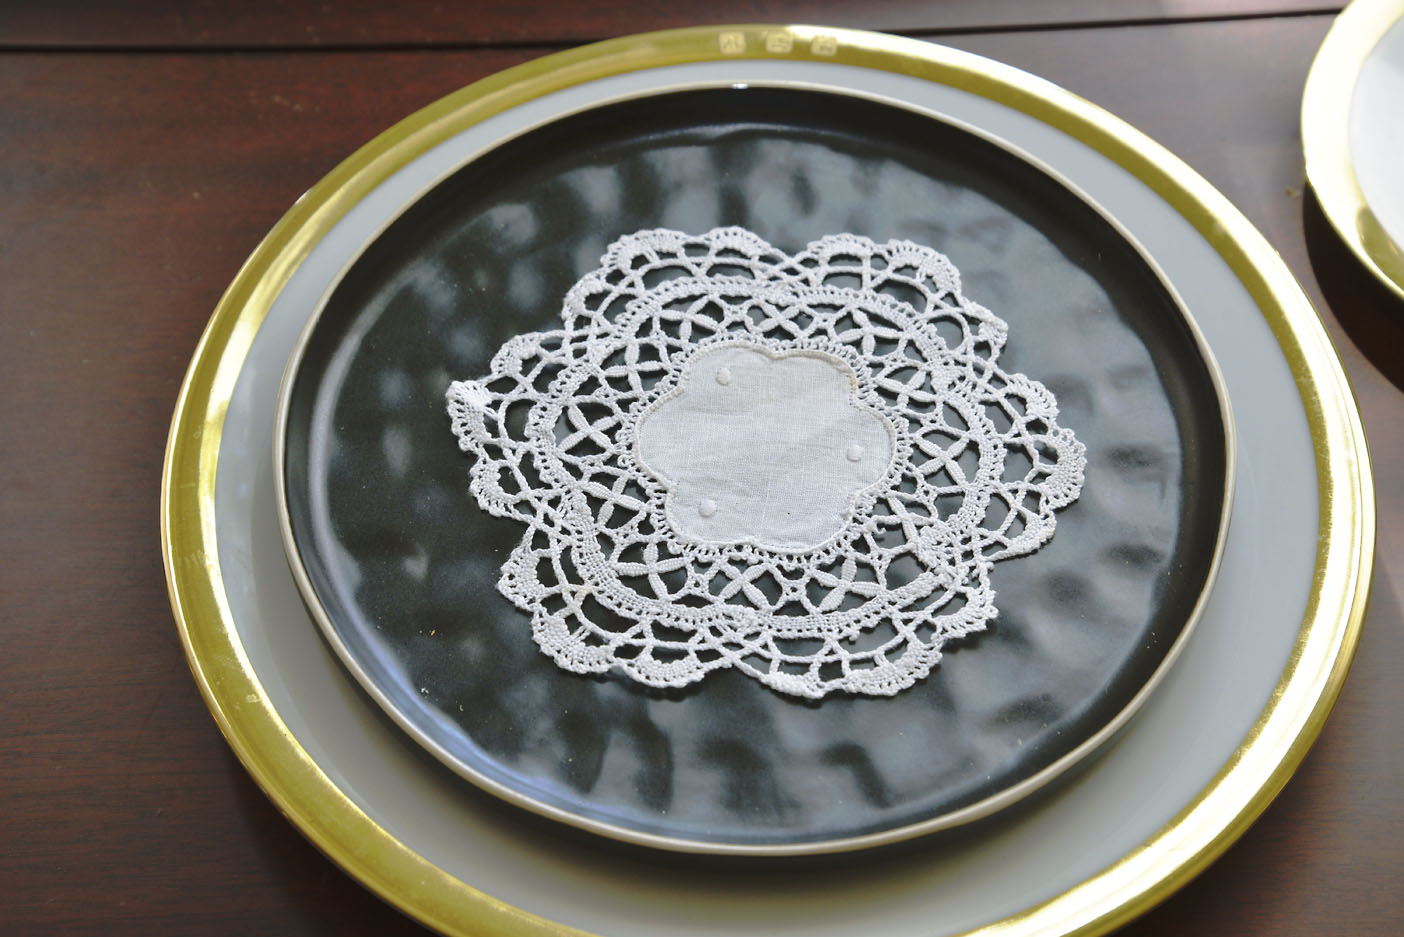 southern hearts cluny lace, heirloom lace doily